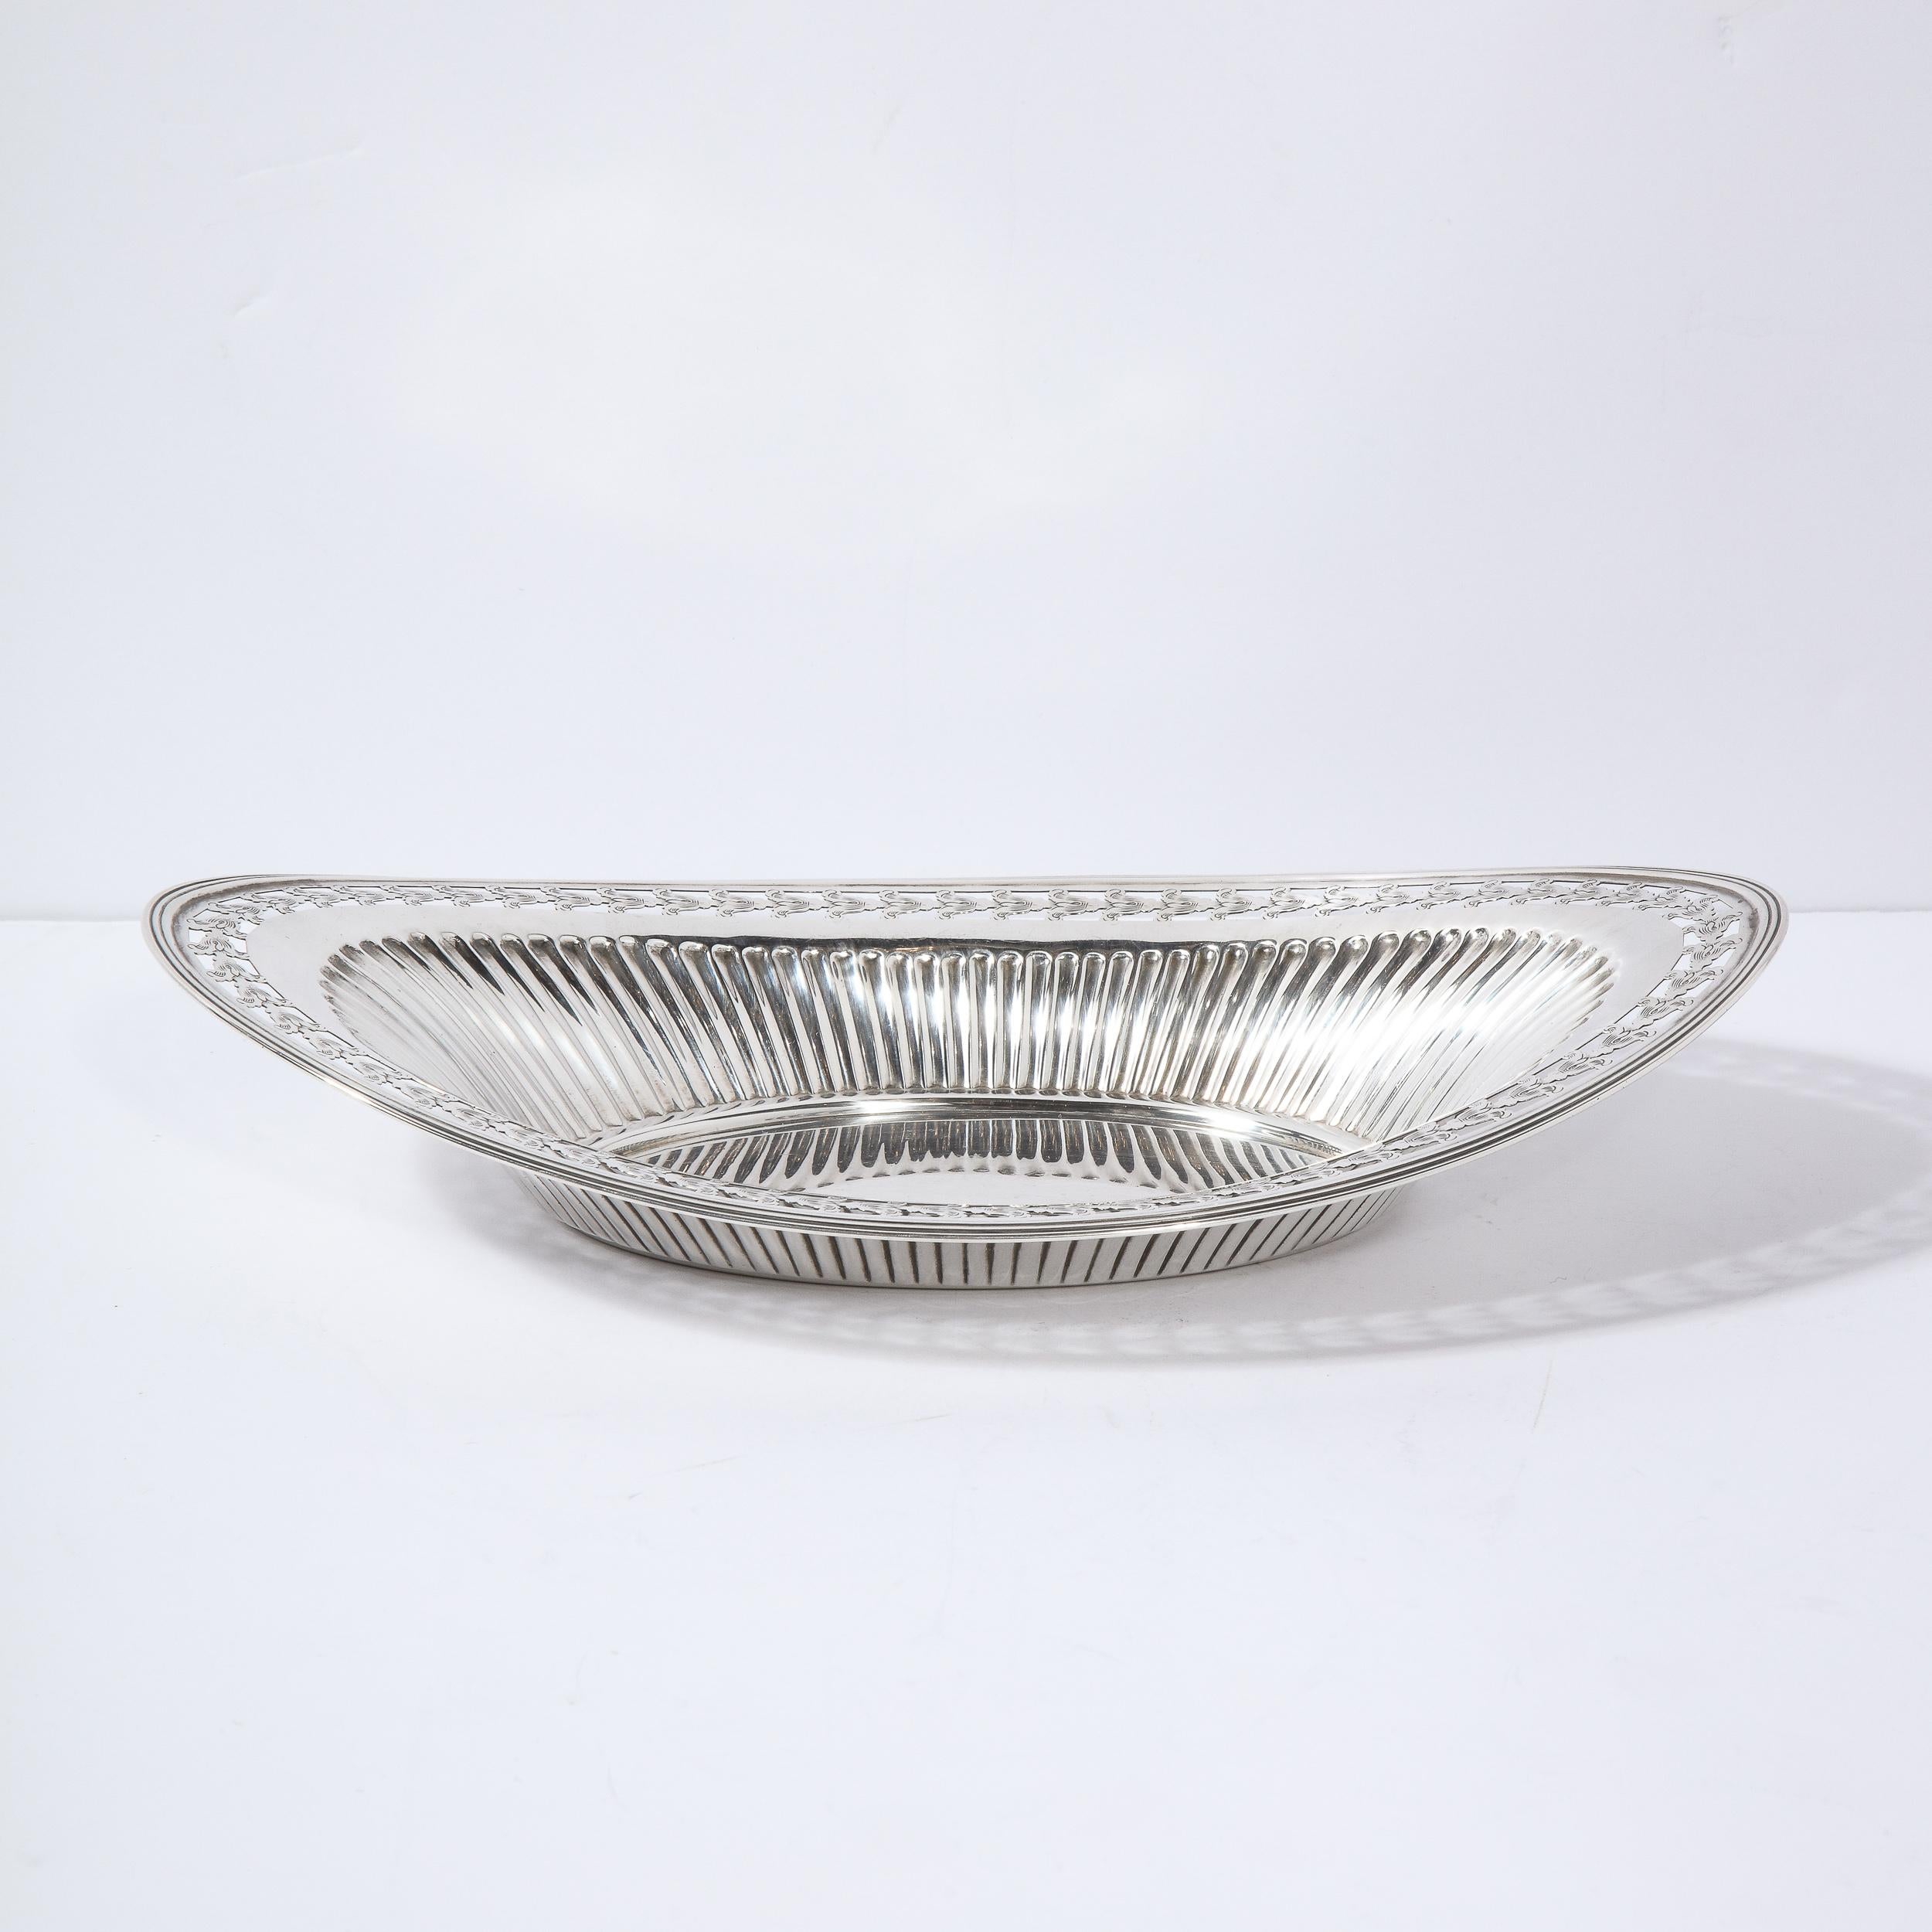 This refined neoclassical style tray features an oval base with undulating channeled sides and a banded exterior edge. Additionally, it offers recurring stylized acanthus leaf capitals (such as those which top corinthian columns) circumscribing the